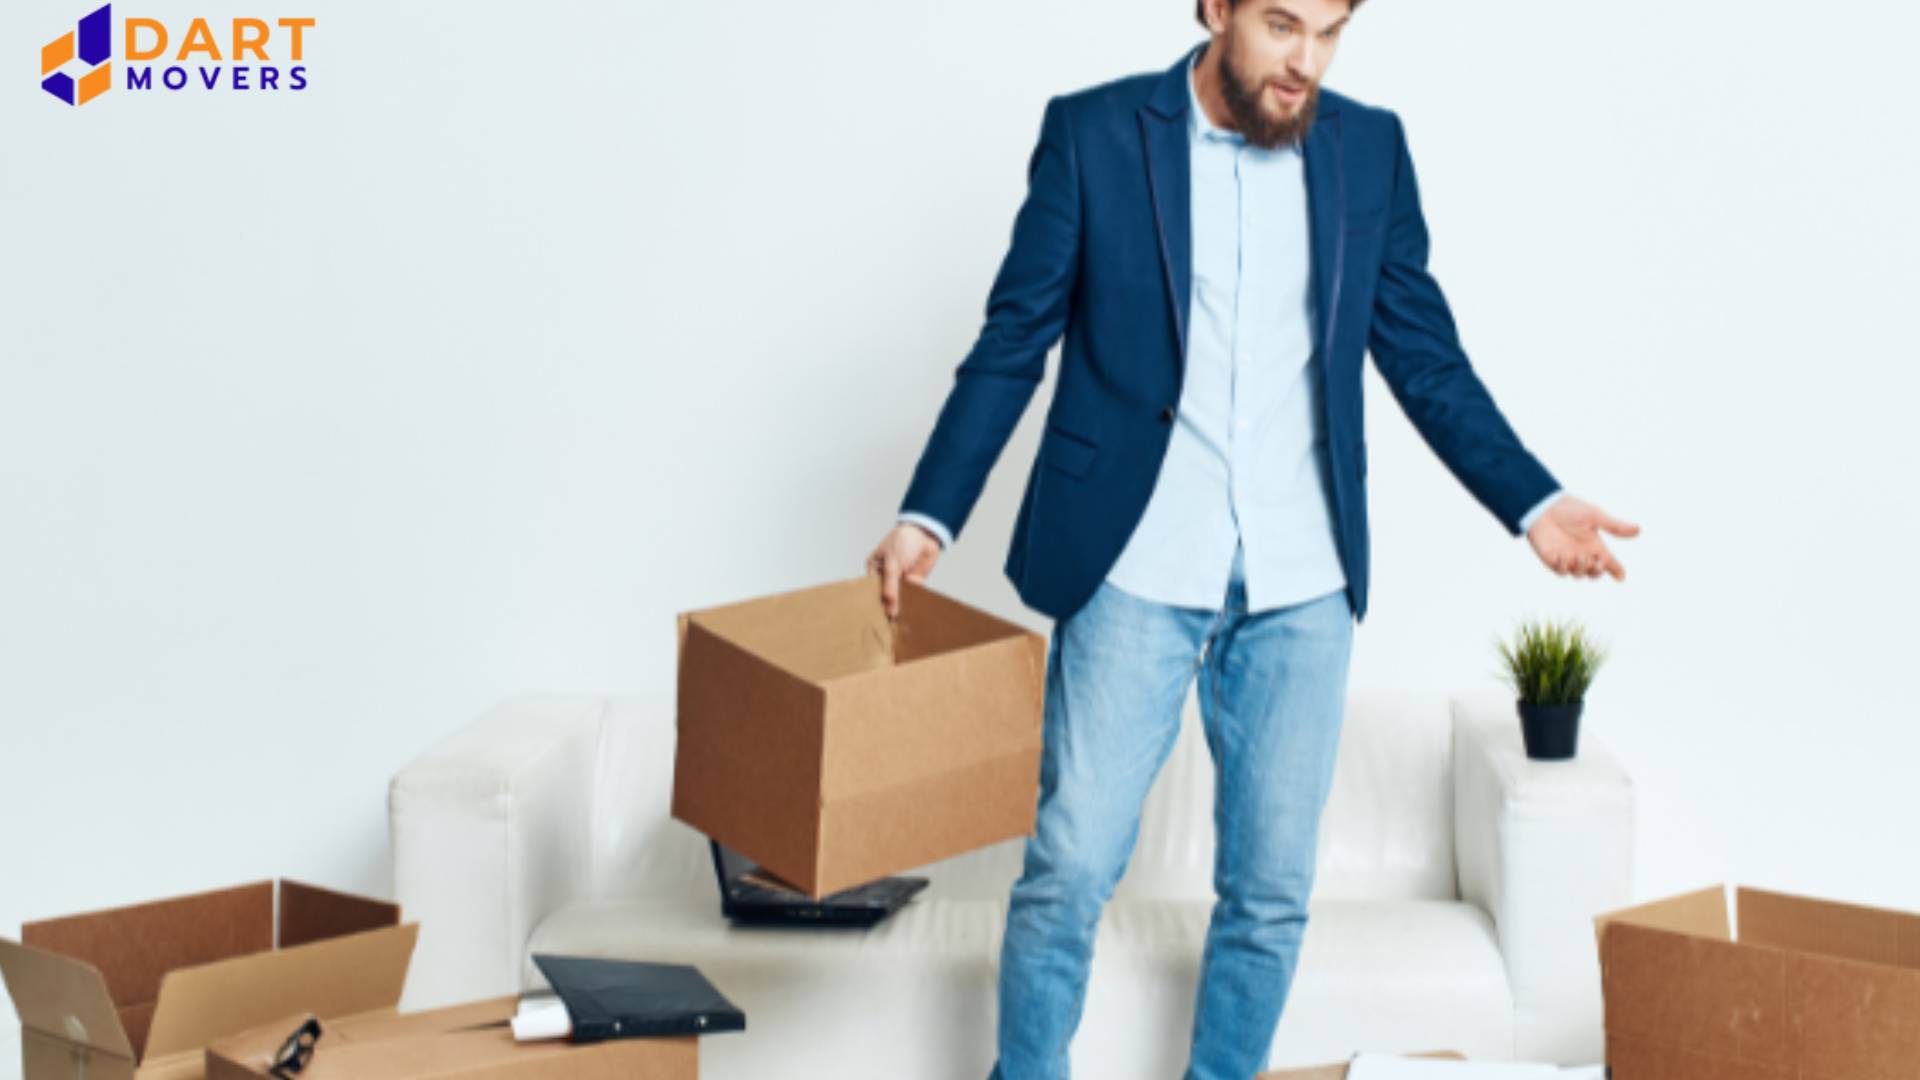 Movers and packers dubai